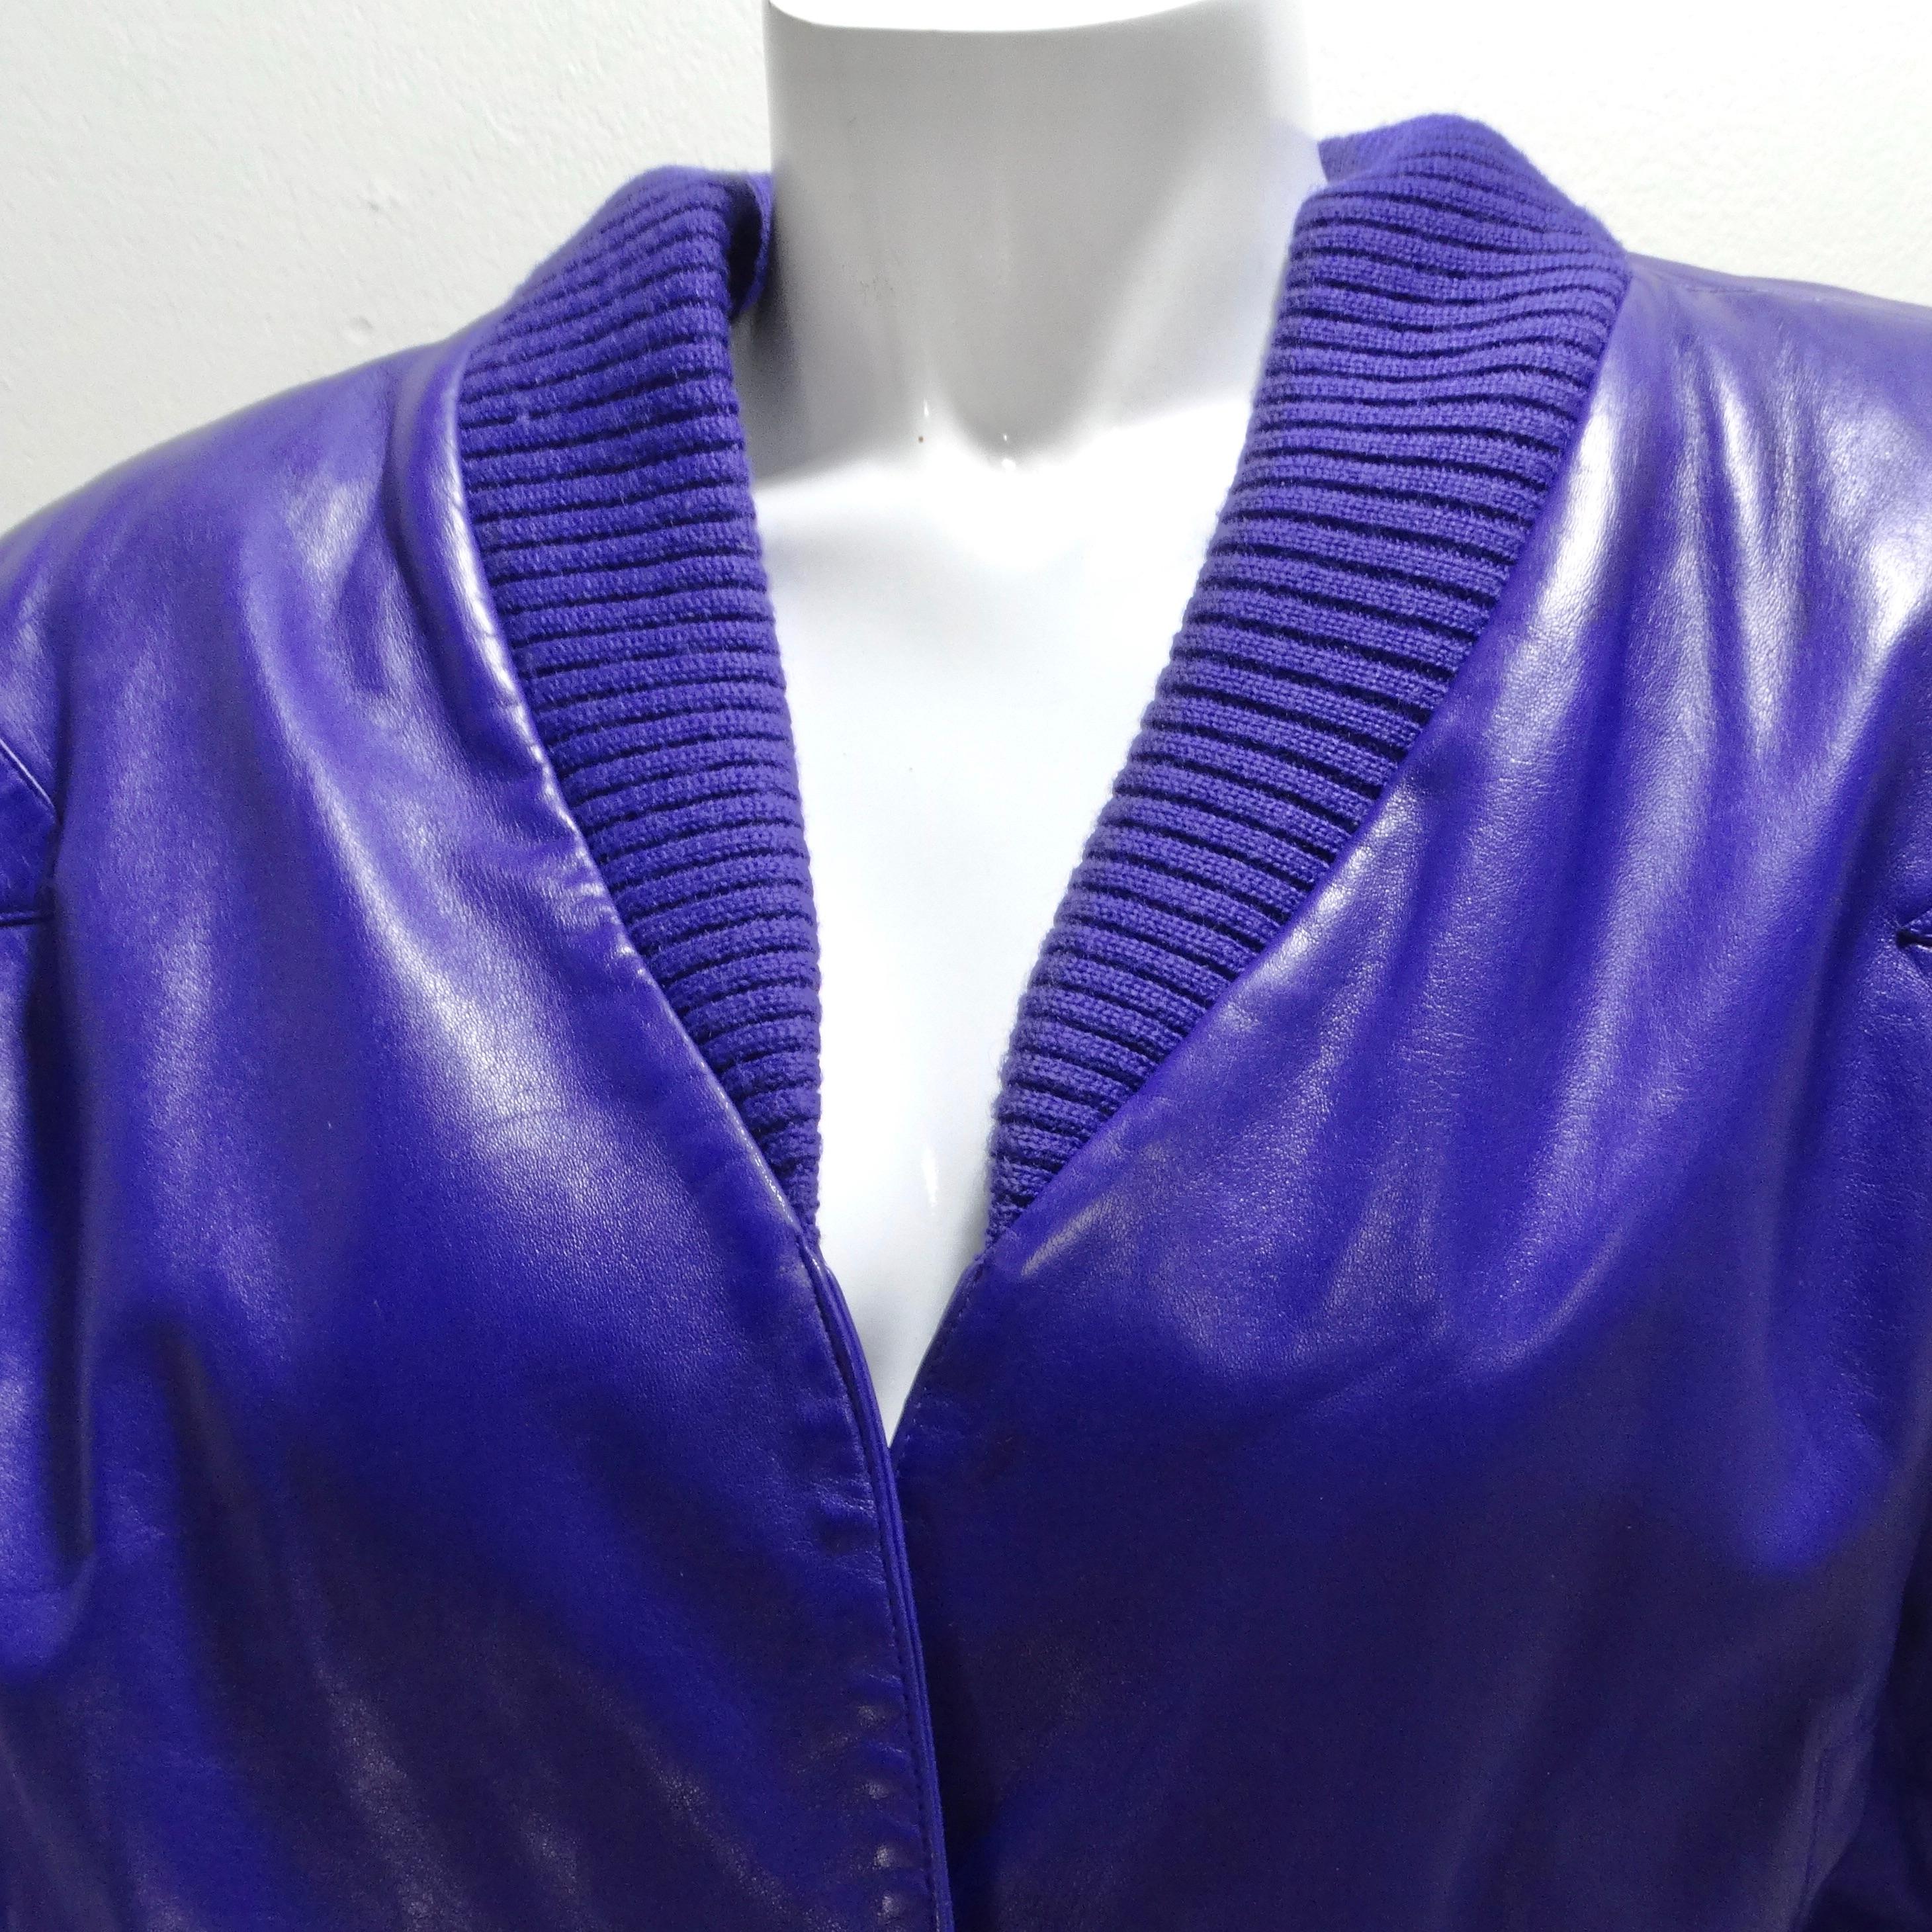 Step into the bold and vibrant era of the '80s with the Claude Montana 1980s Purple Leather Cropped Jacket. This statement piece is a celebration of edgy fashion with its vivid purple hue, embodying the spirit of the era. The jacket boasts